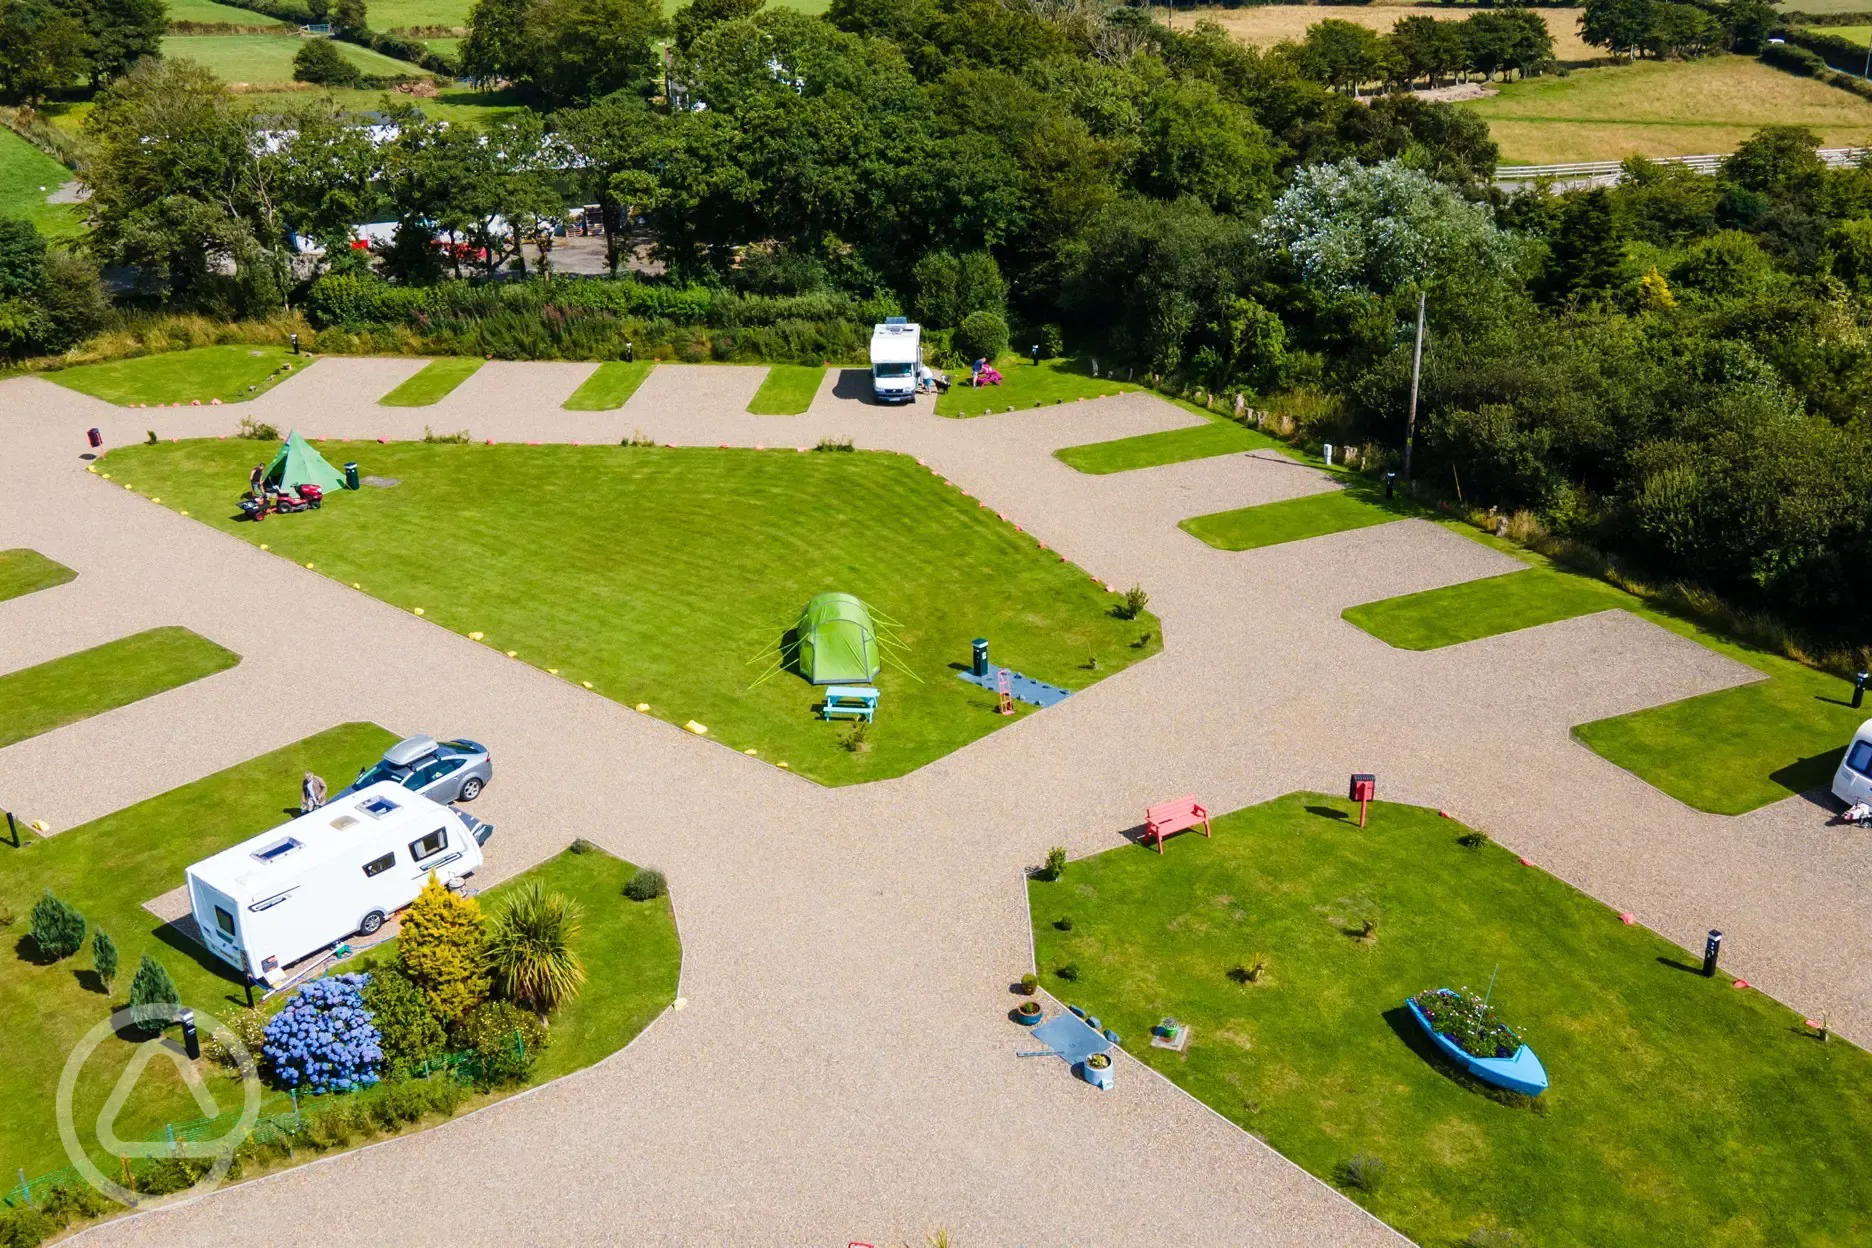 Aerial of the hardstanding pitches